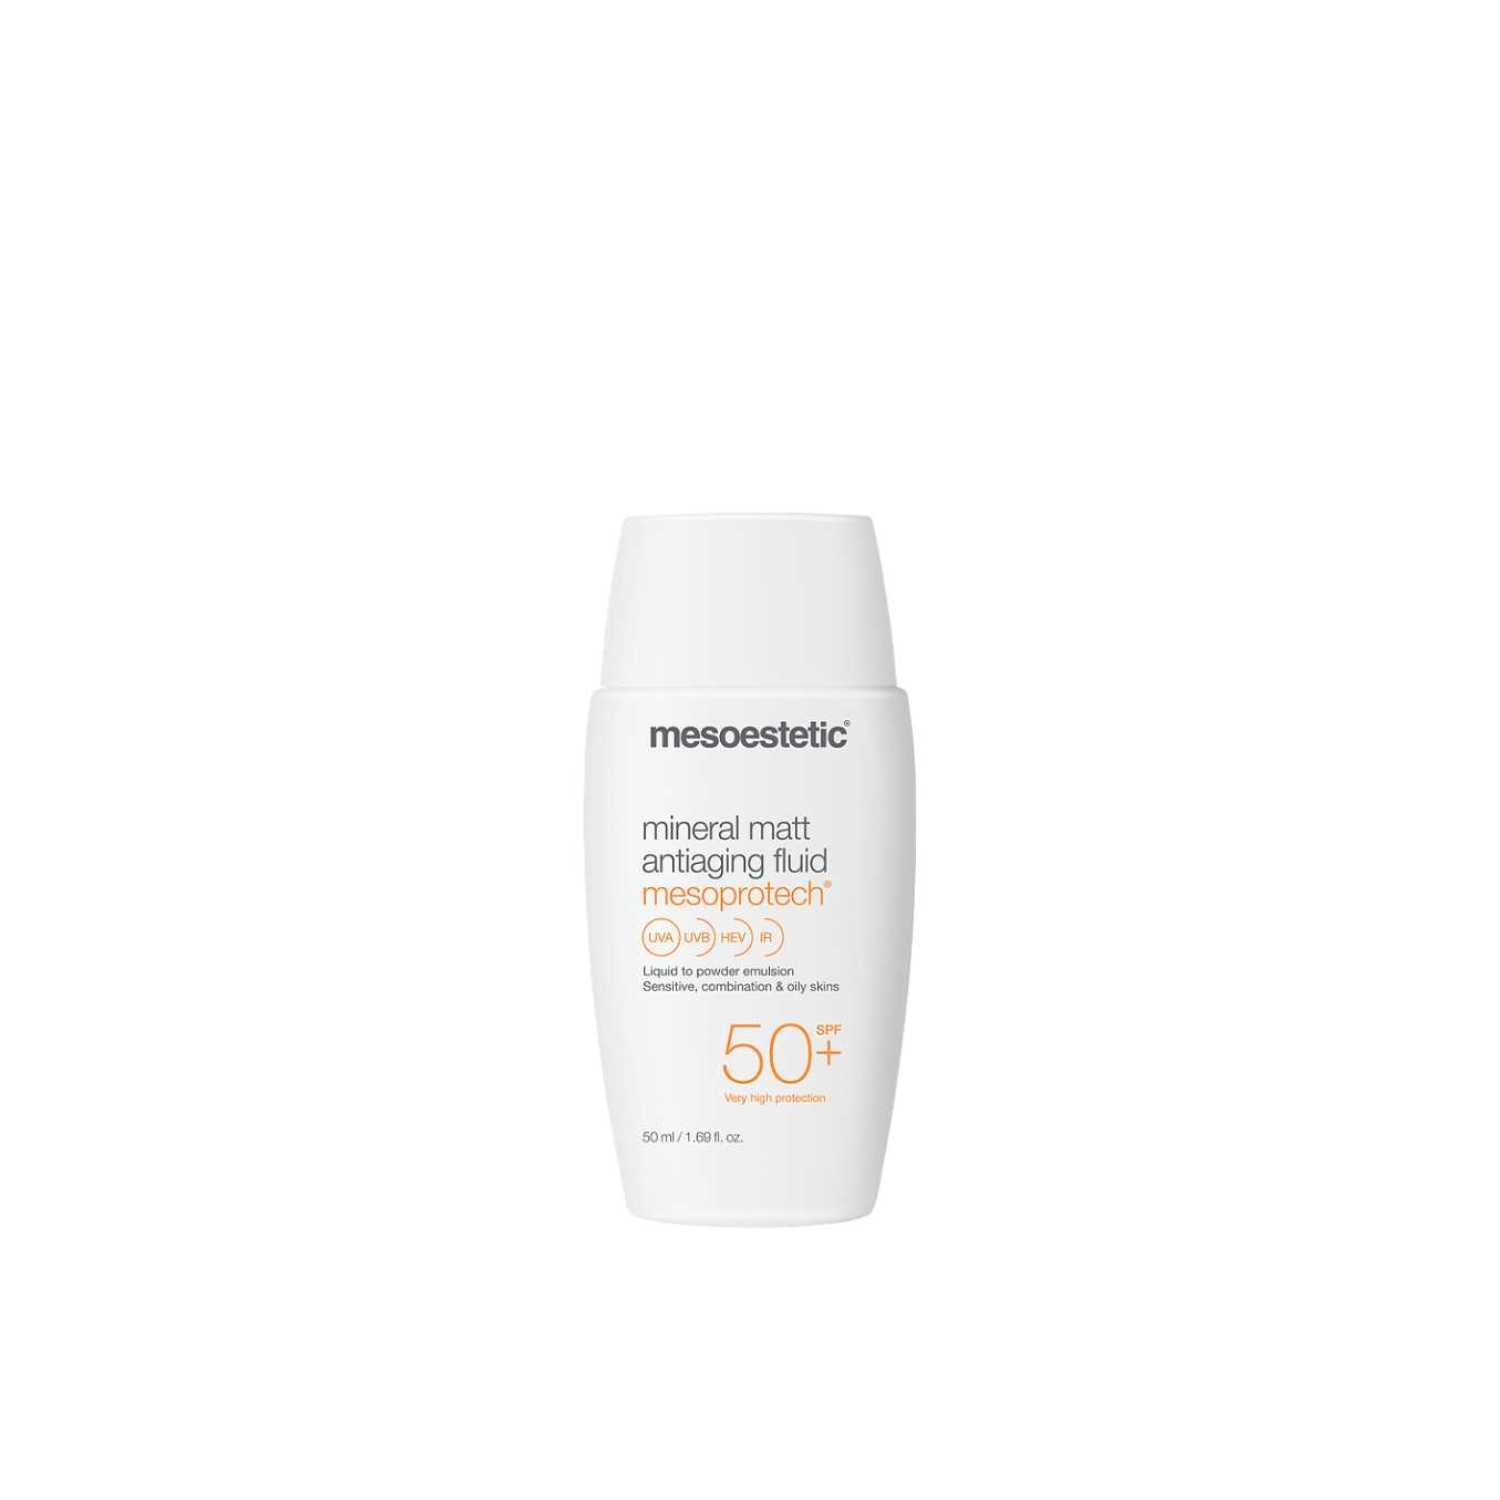 Mesoestetic®mesoprotech mineral fluid 50